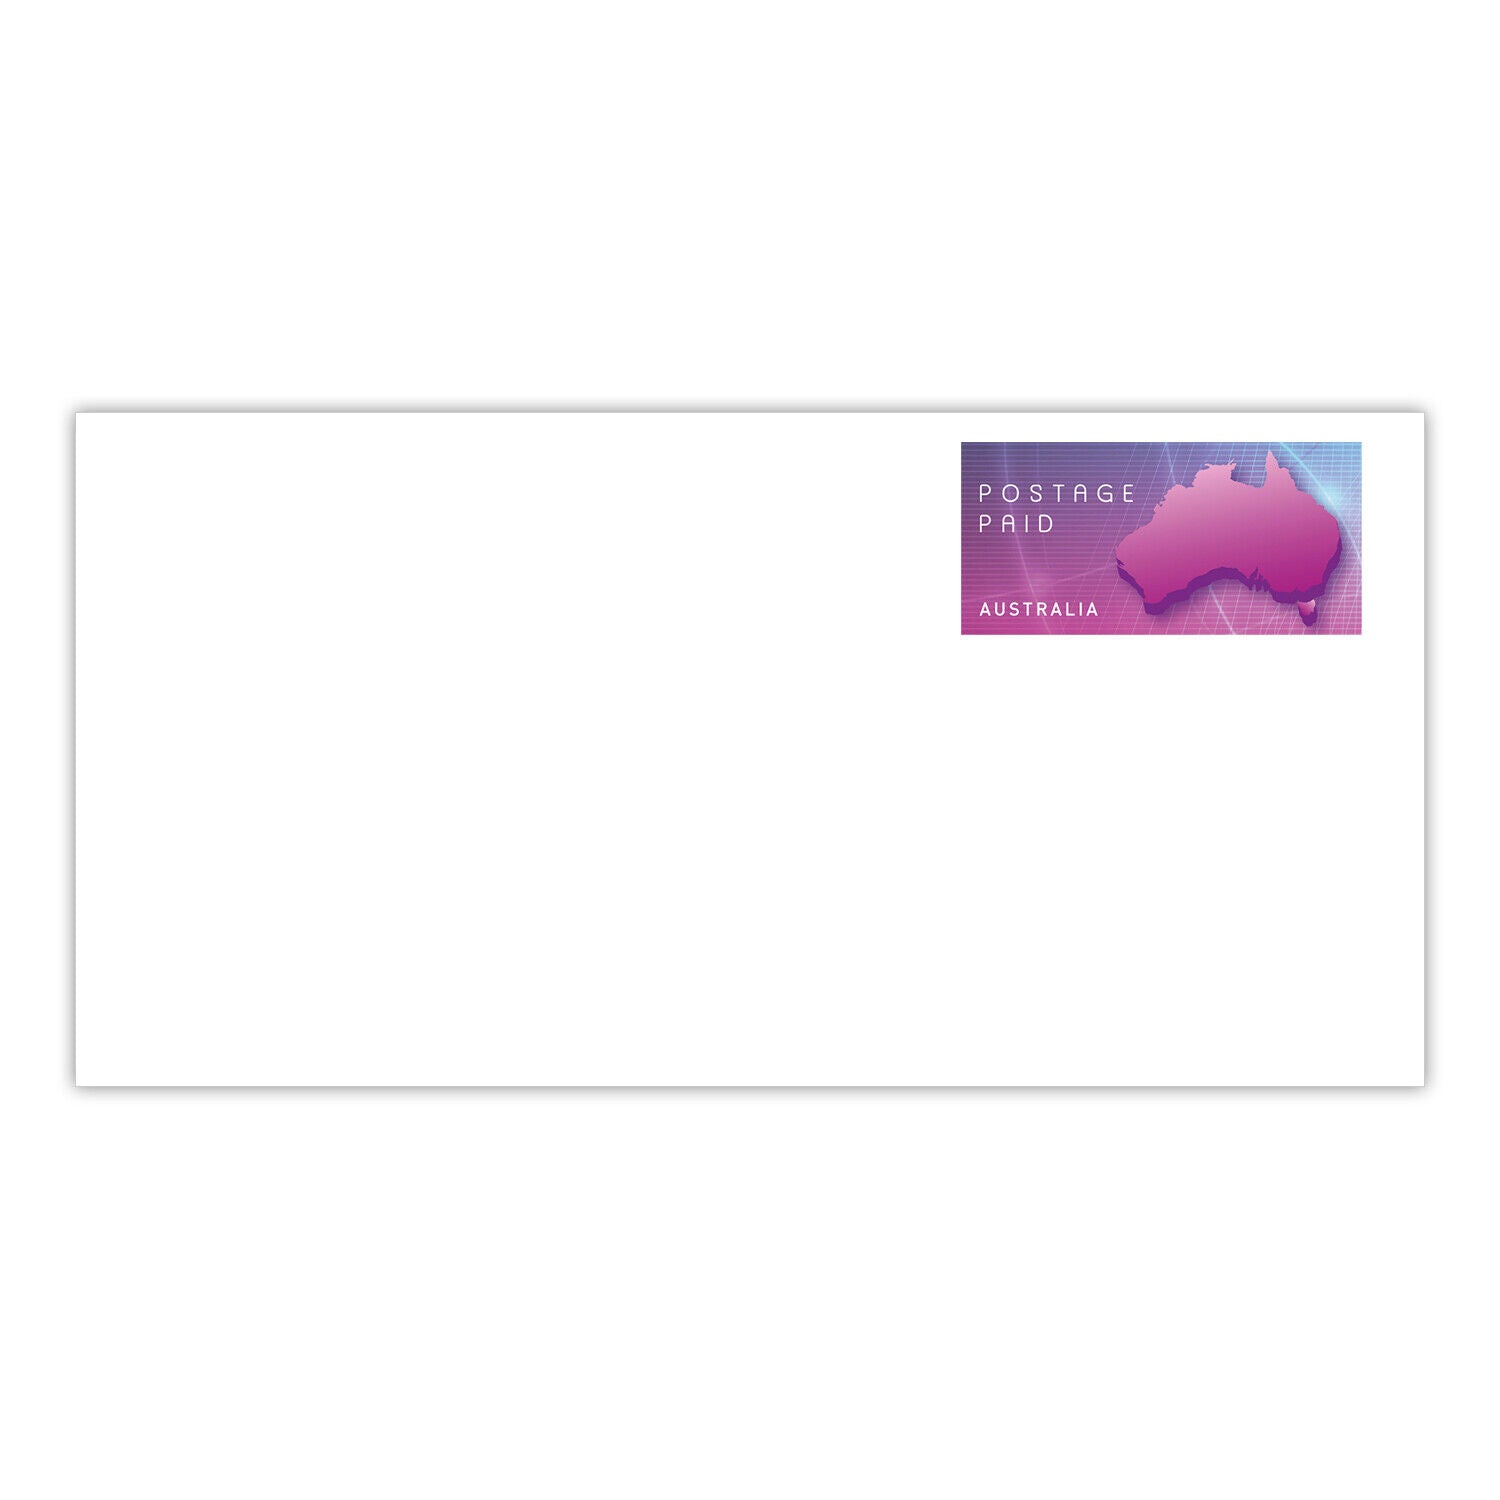 Australia Post Small DL Prepaid Envelope up to 250g – 500 Pack RRP $705